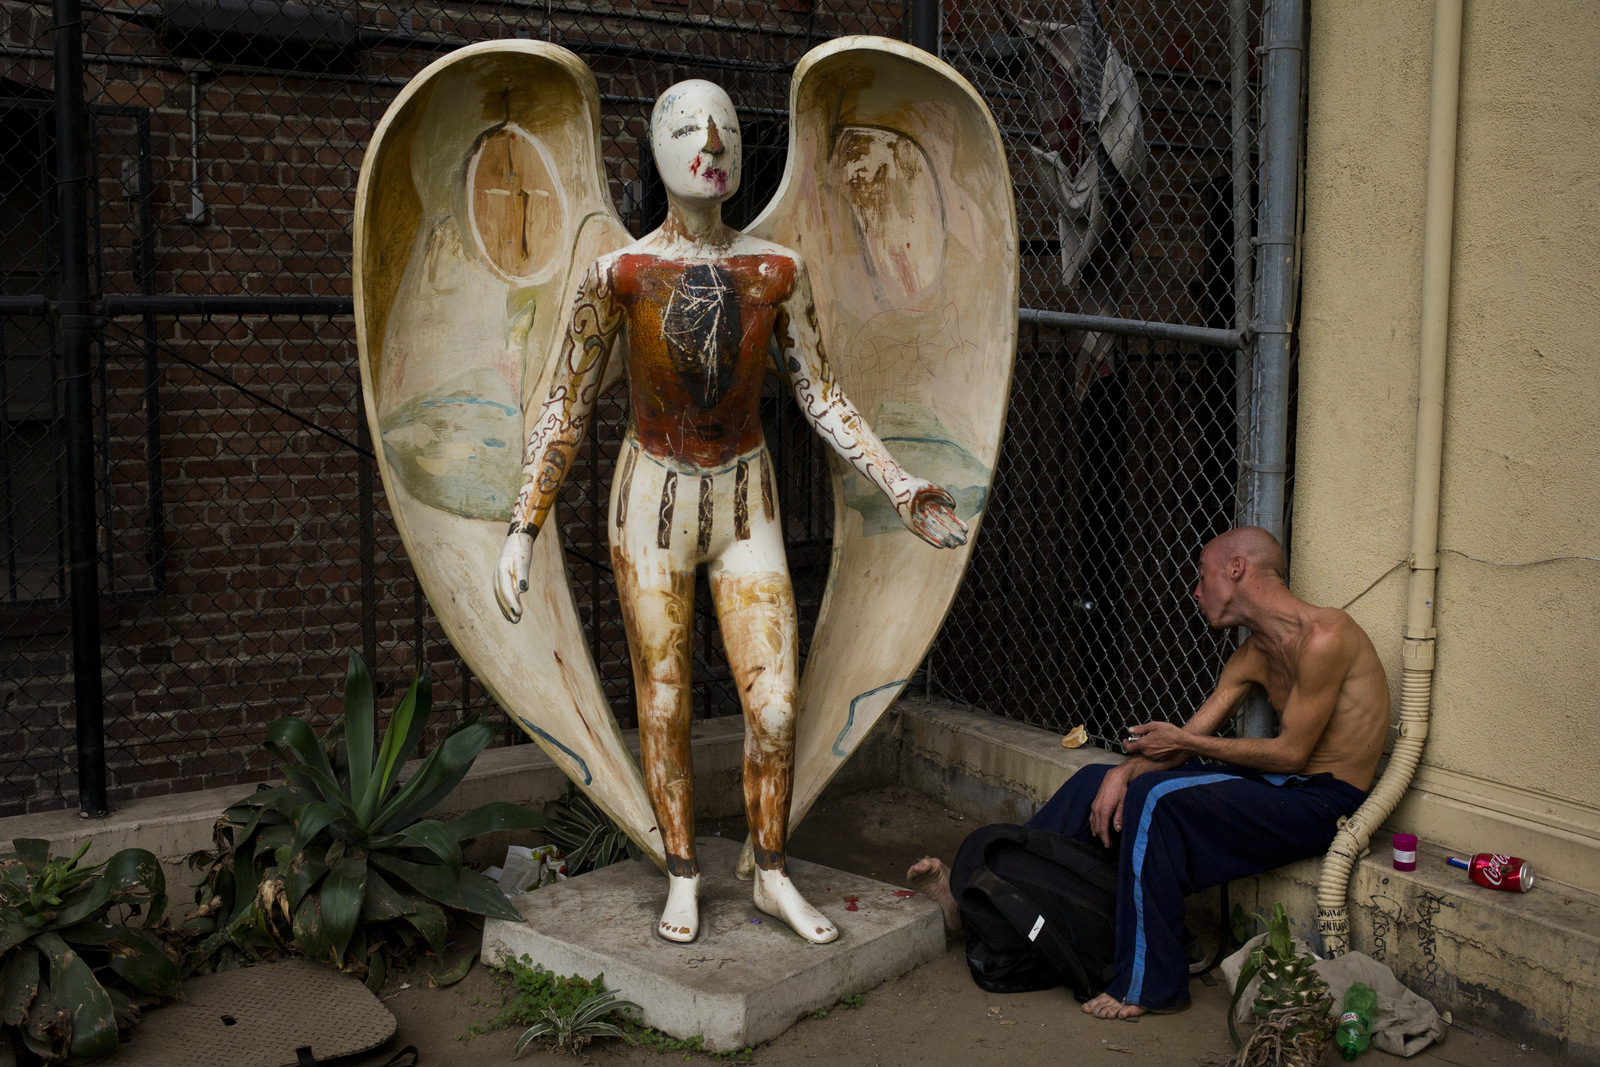 Homeless drug addict Andrew Hudson, 33, injects himself with heroin next to an angel statue, Nov. 8, 2017, in the Skid Row area of downtown Los Angeles. "It's miserable quitting, or trying - trying anything," said Hudson. Skid Row is home to thousands of chronically homeless people on the edge of the downtown. (AP/Jae C. Hong)